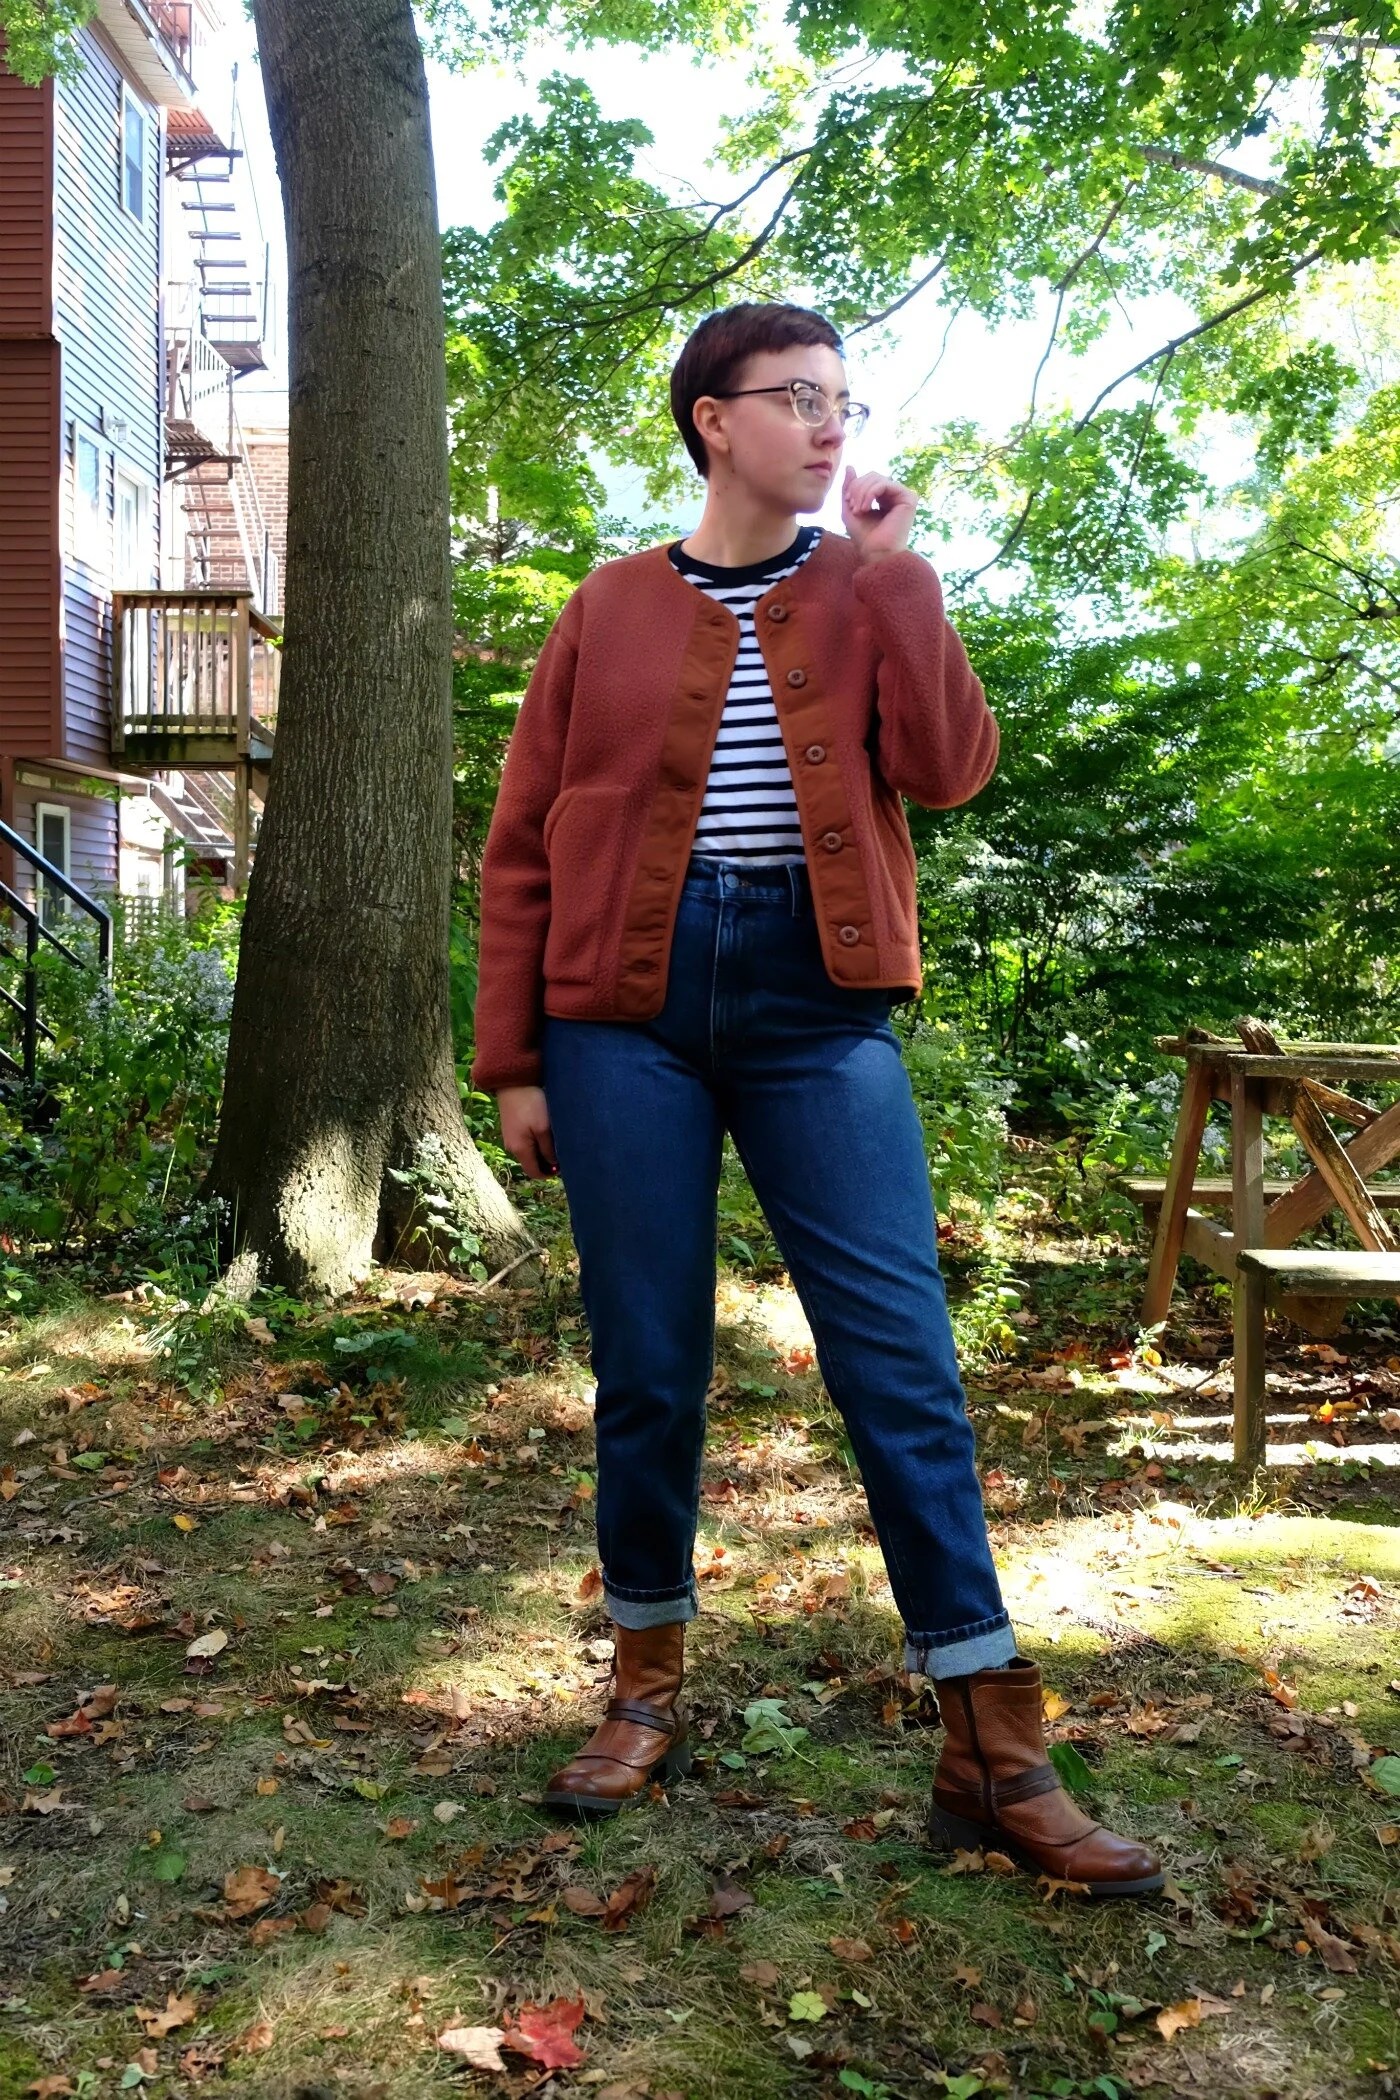 Leah wears a striped shirt with jeans, boots, and an orange brown fleece jacket - Everlane ReNew Teddy Liner